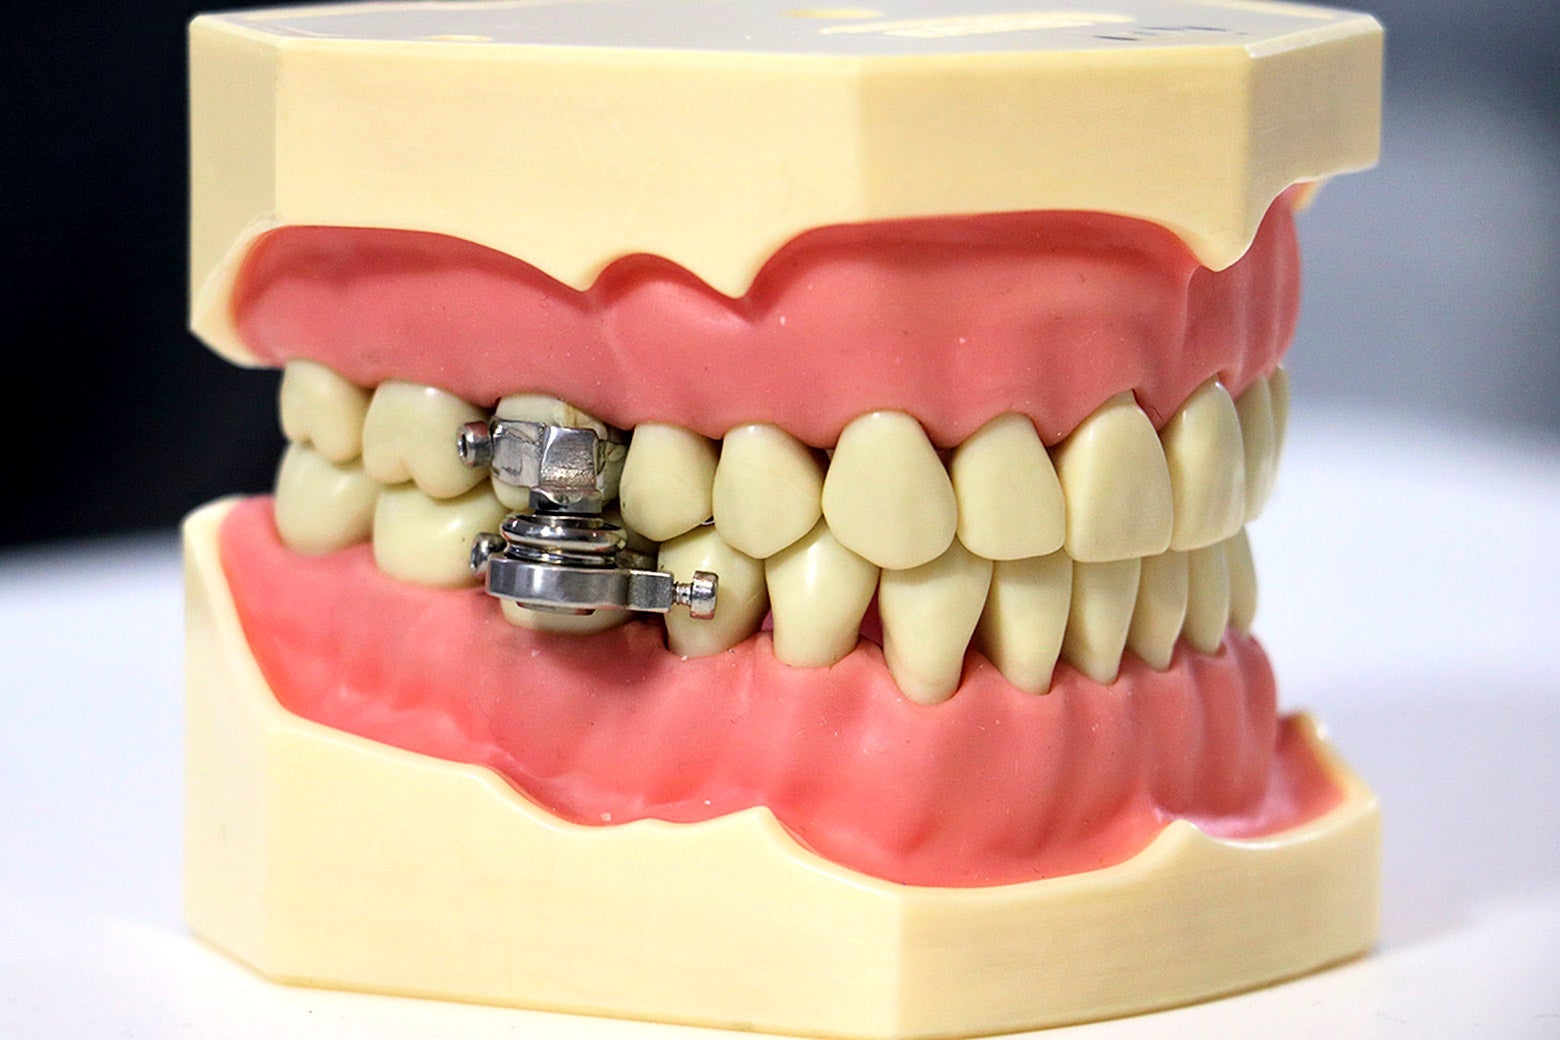 A model of a jaw and teeth with the magnetic lock holding the jaw together.